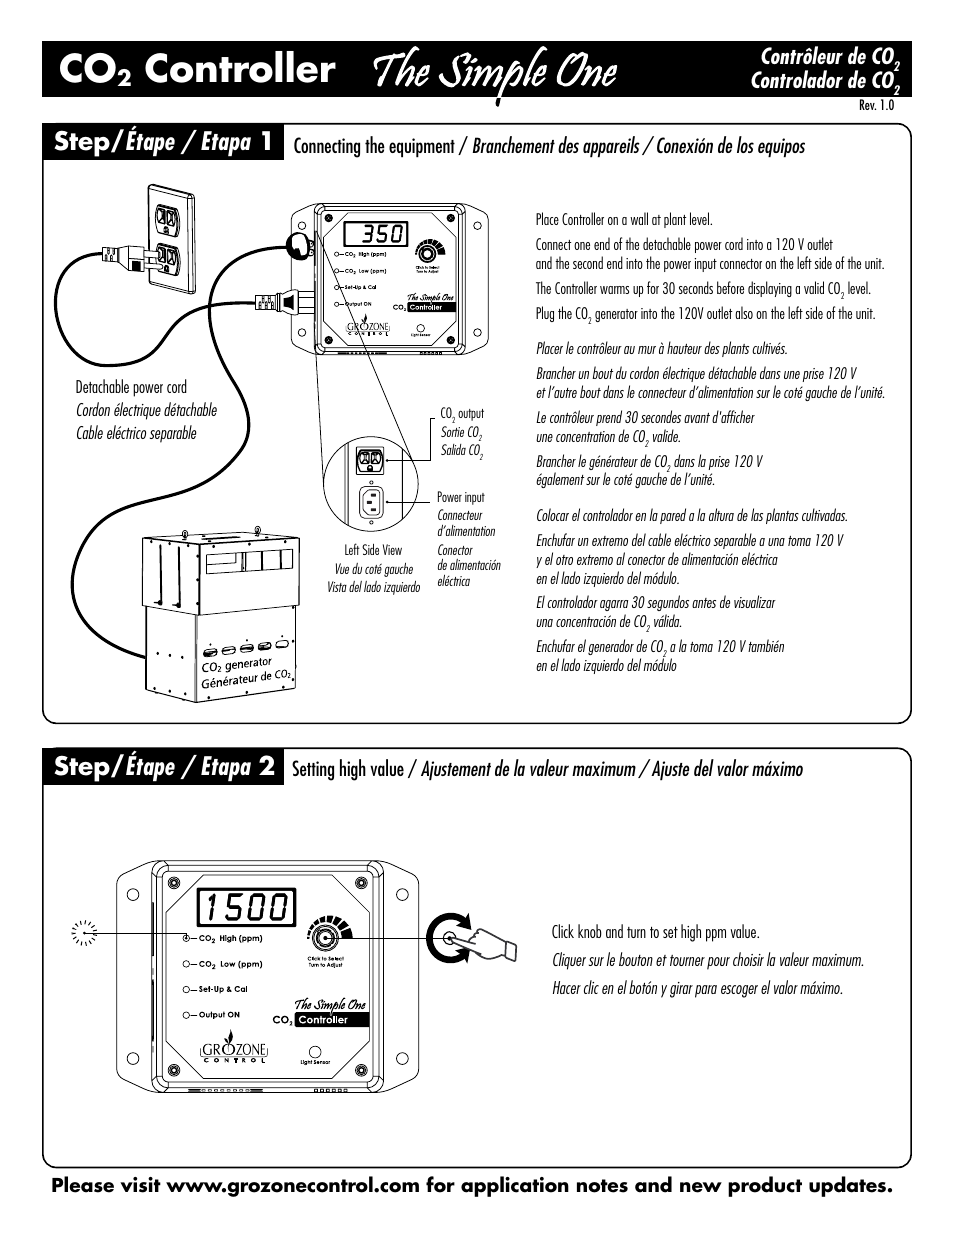 Sunlight Supply Grozone Control SCO2 0-5000 PPM CO2 Controller "Simple One Series User Manual | 4 pages